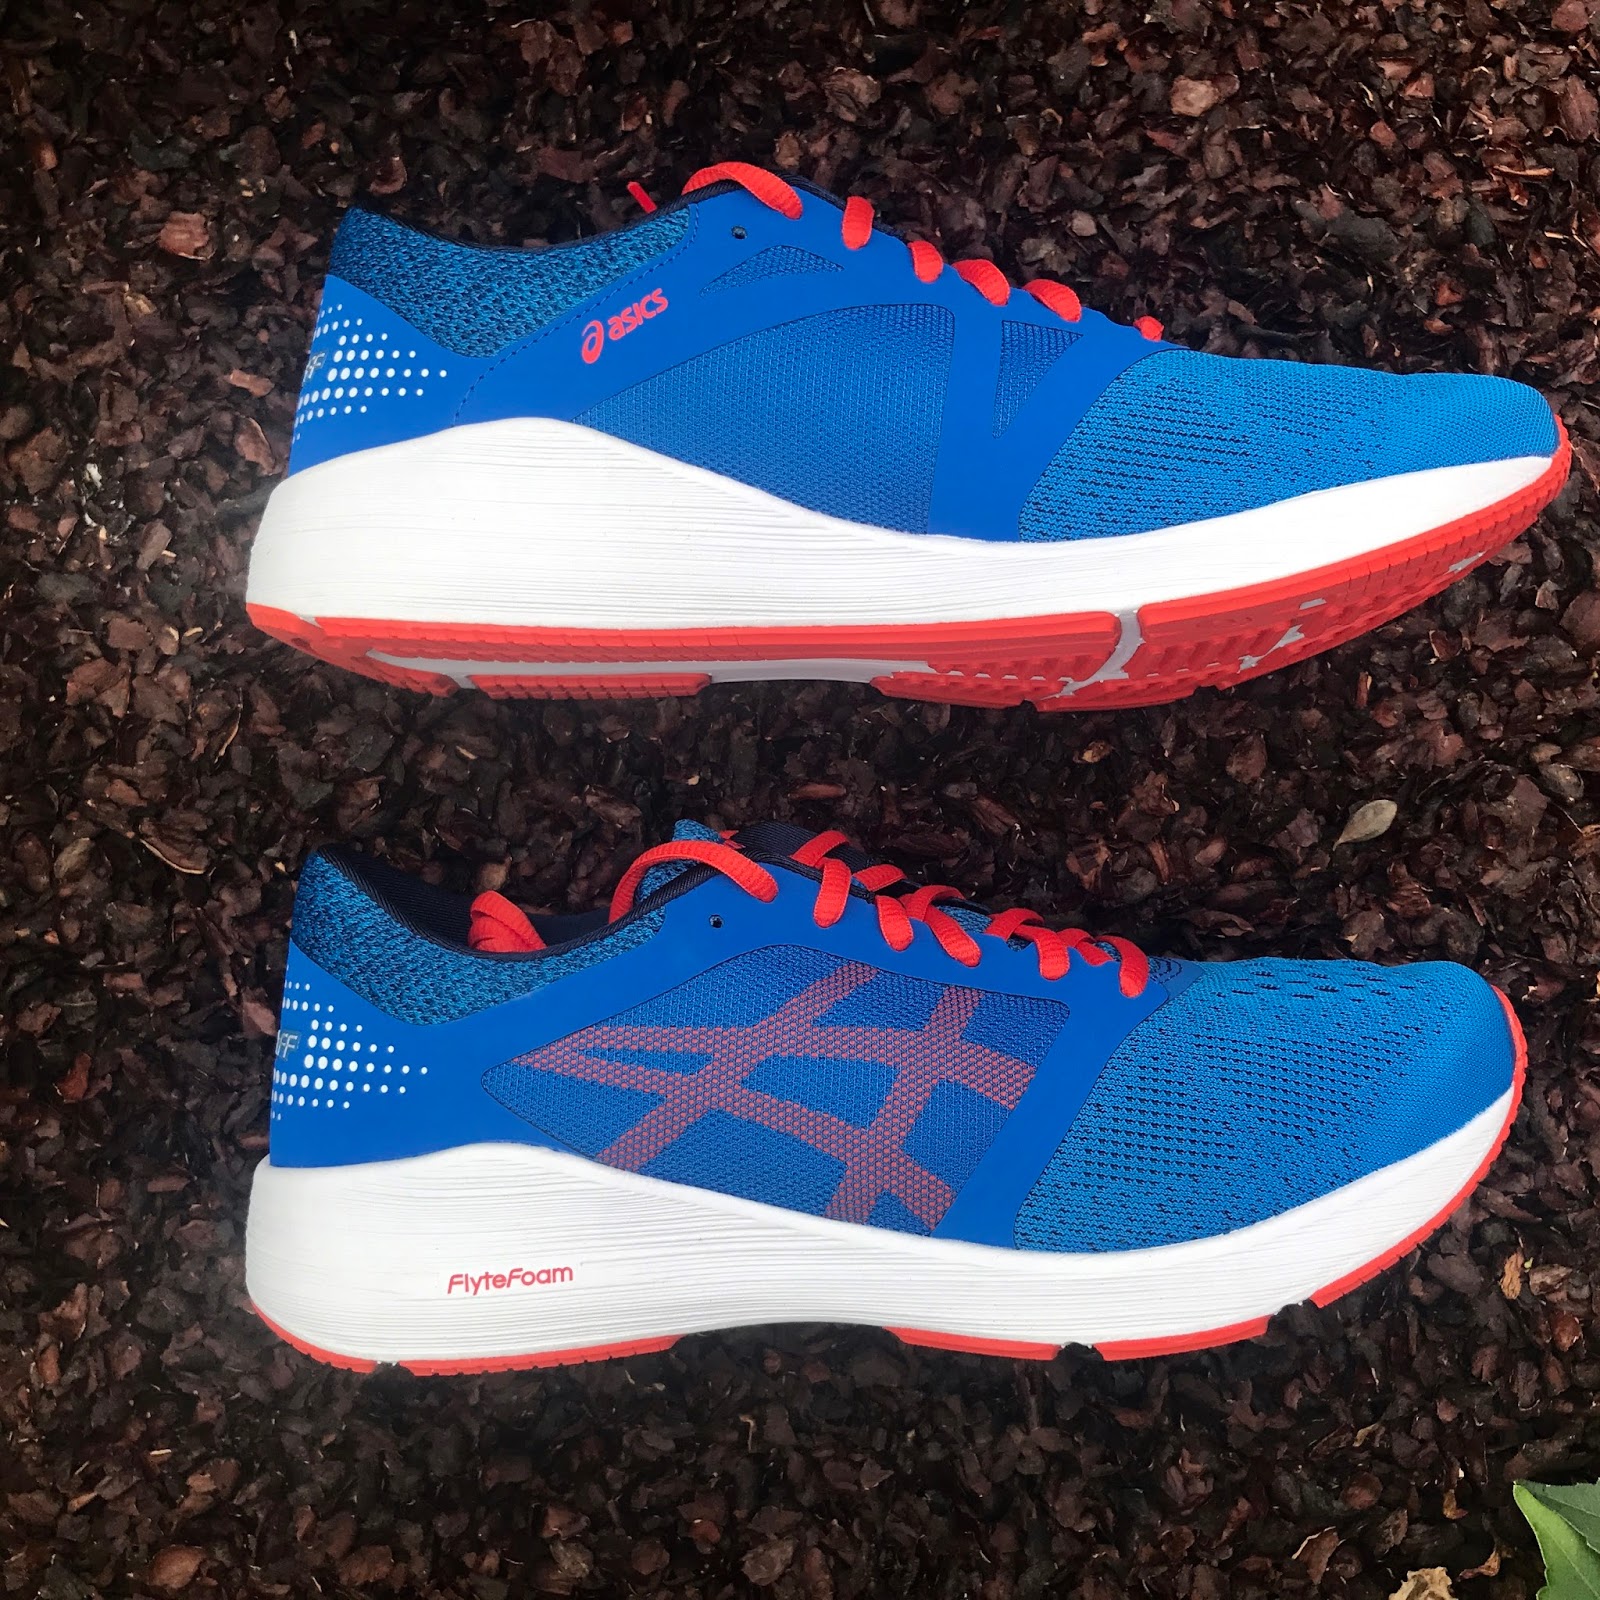 ASICS Kayano vs Nimbus: Which is Right For You? - RunToTheFinish